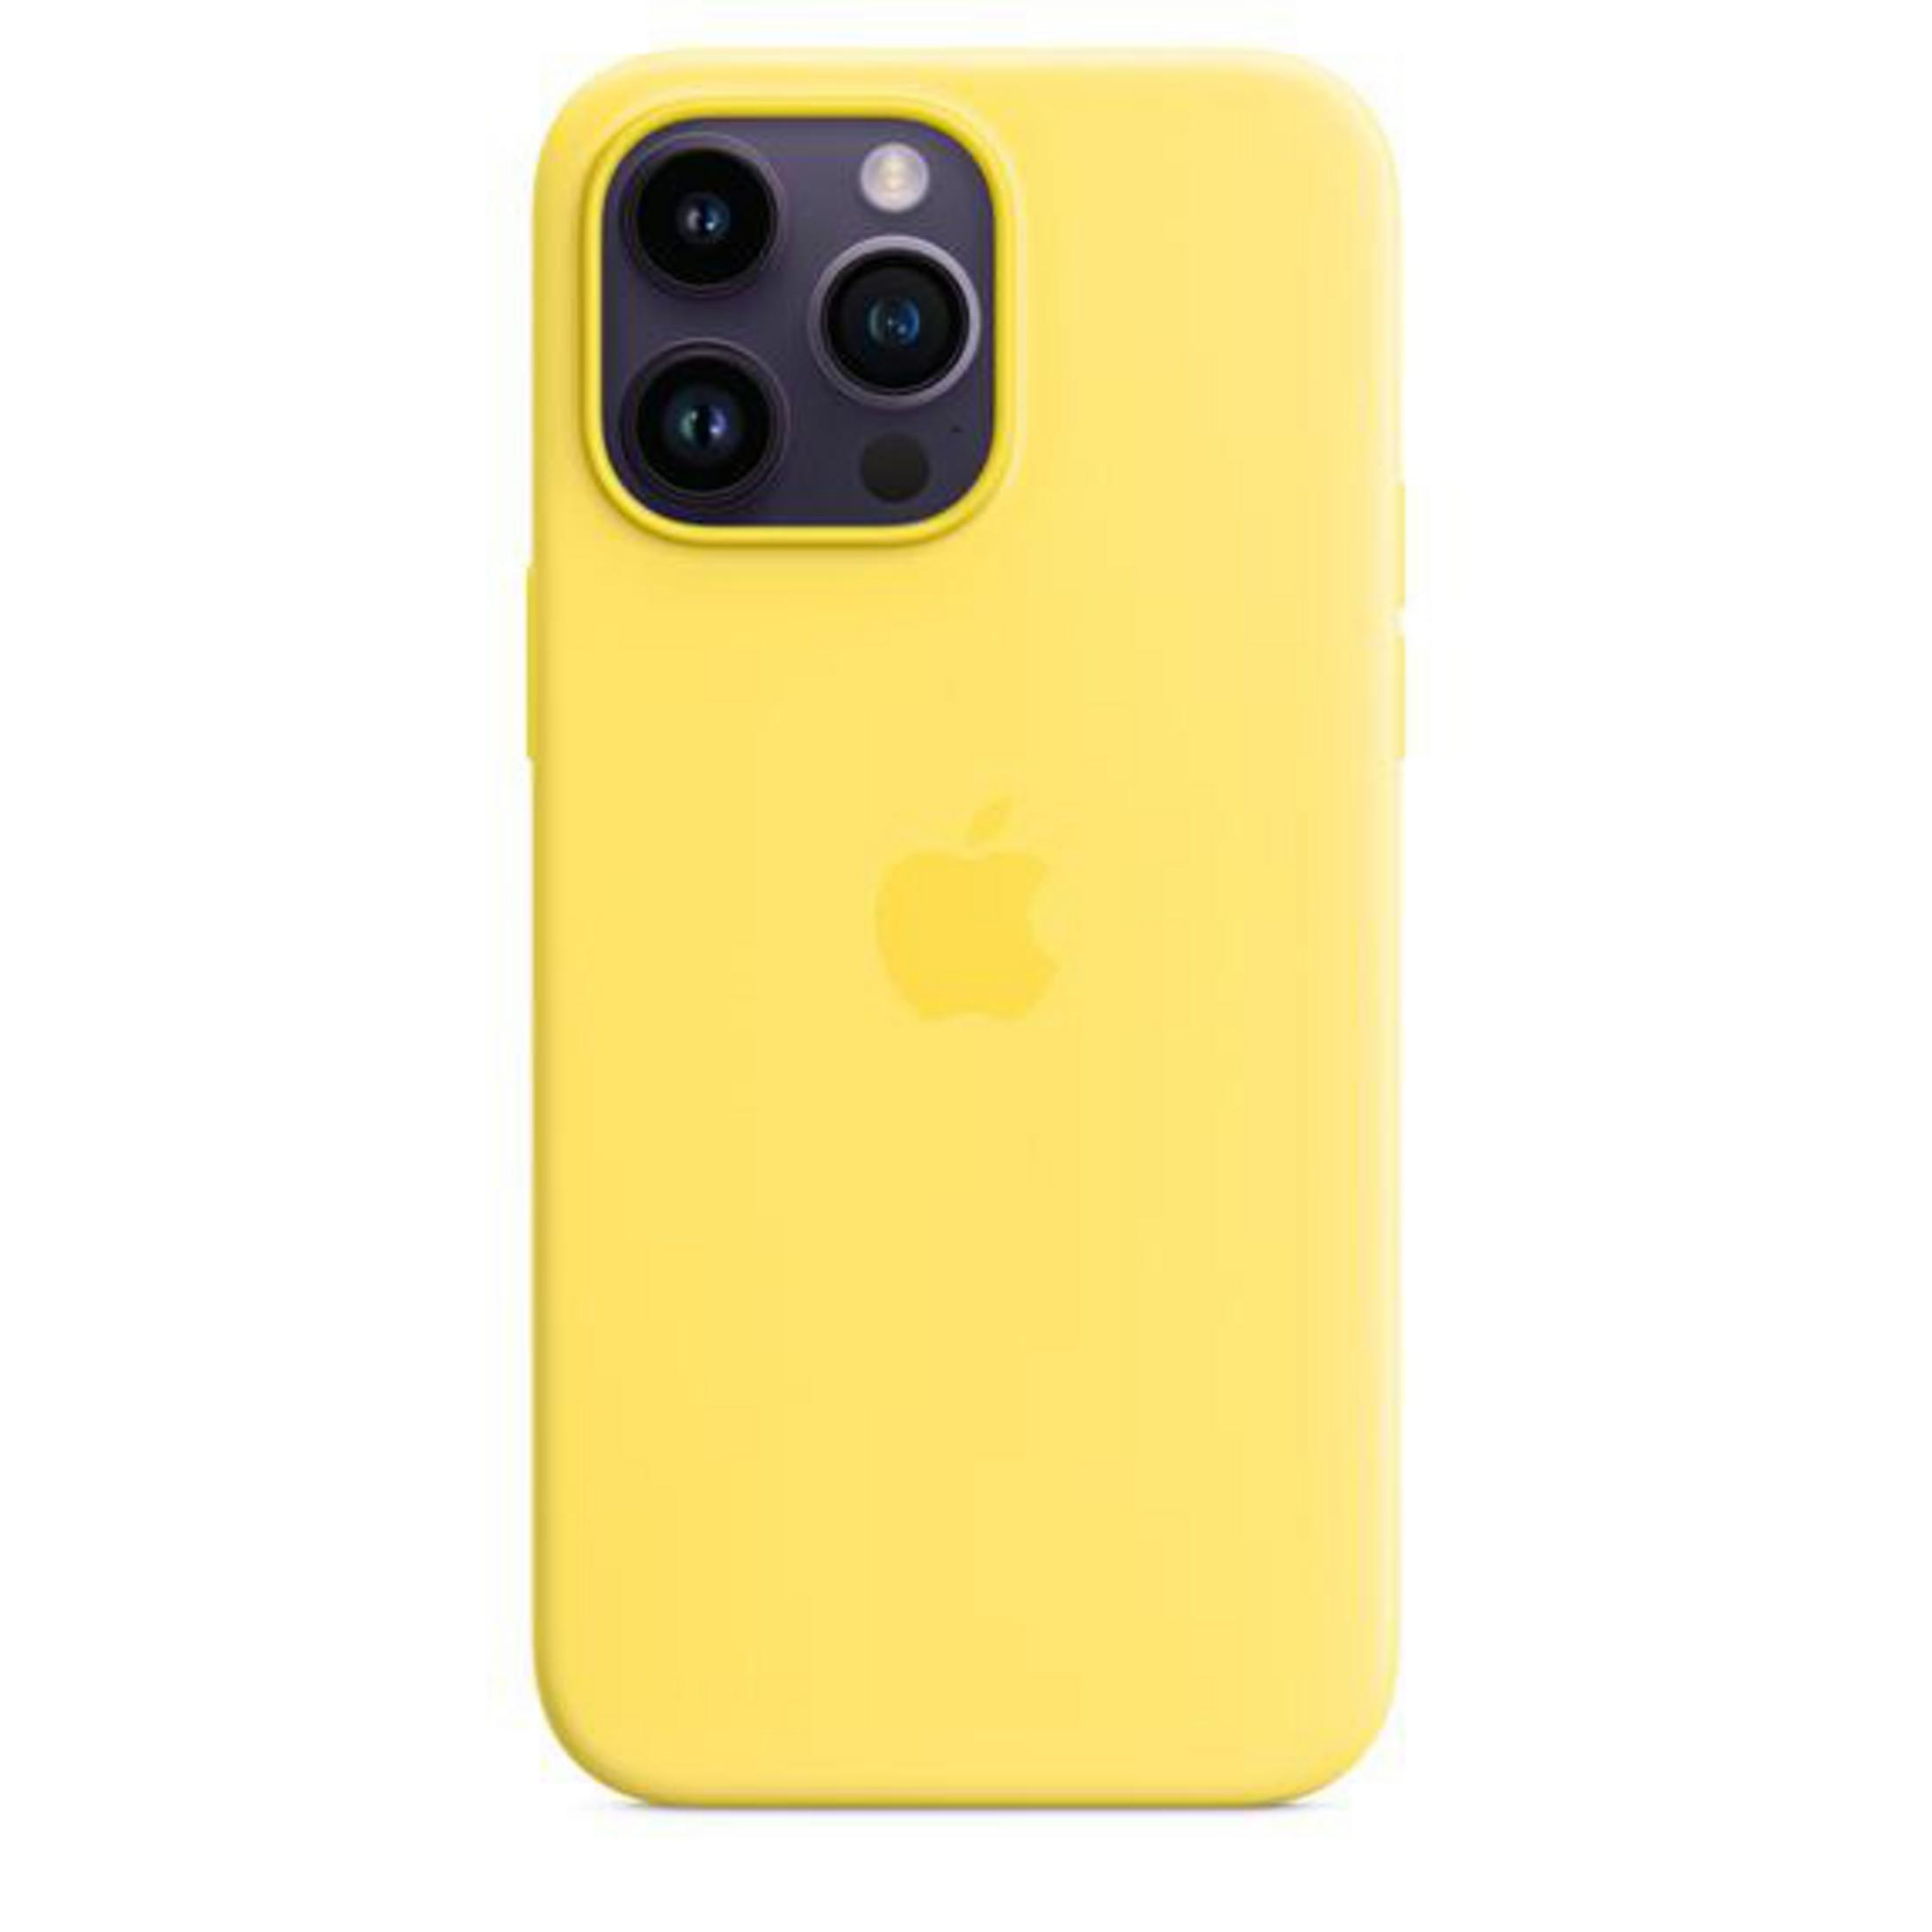 Backcover, SIL Kanariengelb MS IP14PROMAX CAYLW, CASE MQUL3ZM/A Apple, Pro 14 Max, iPhone APPLE